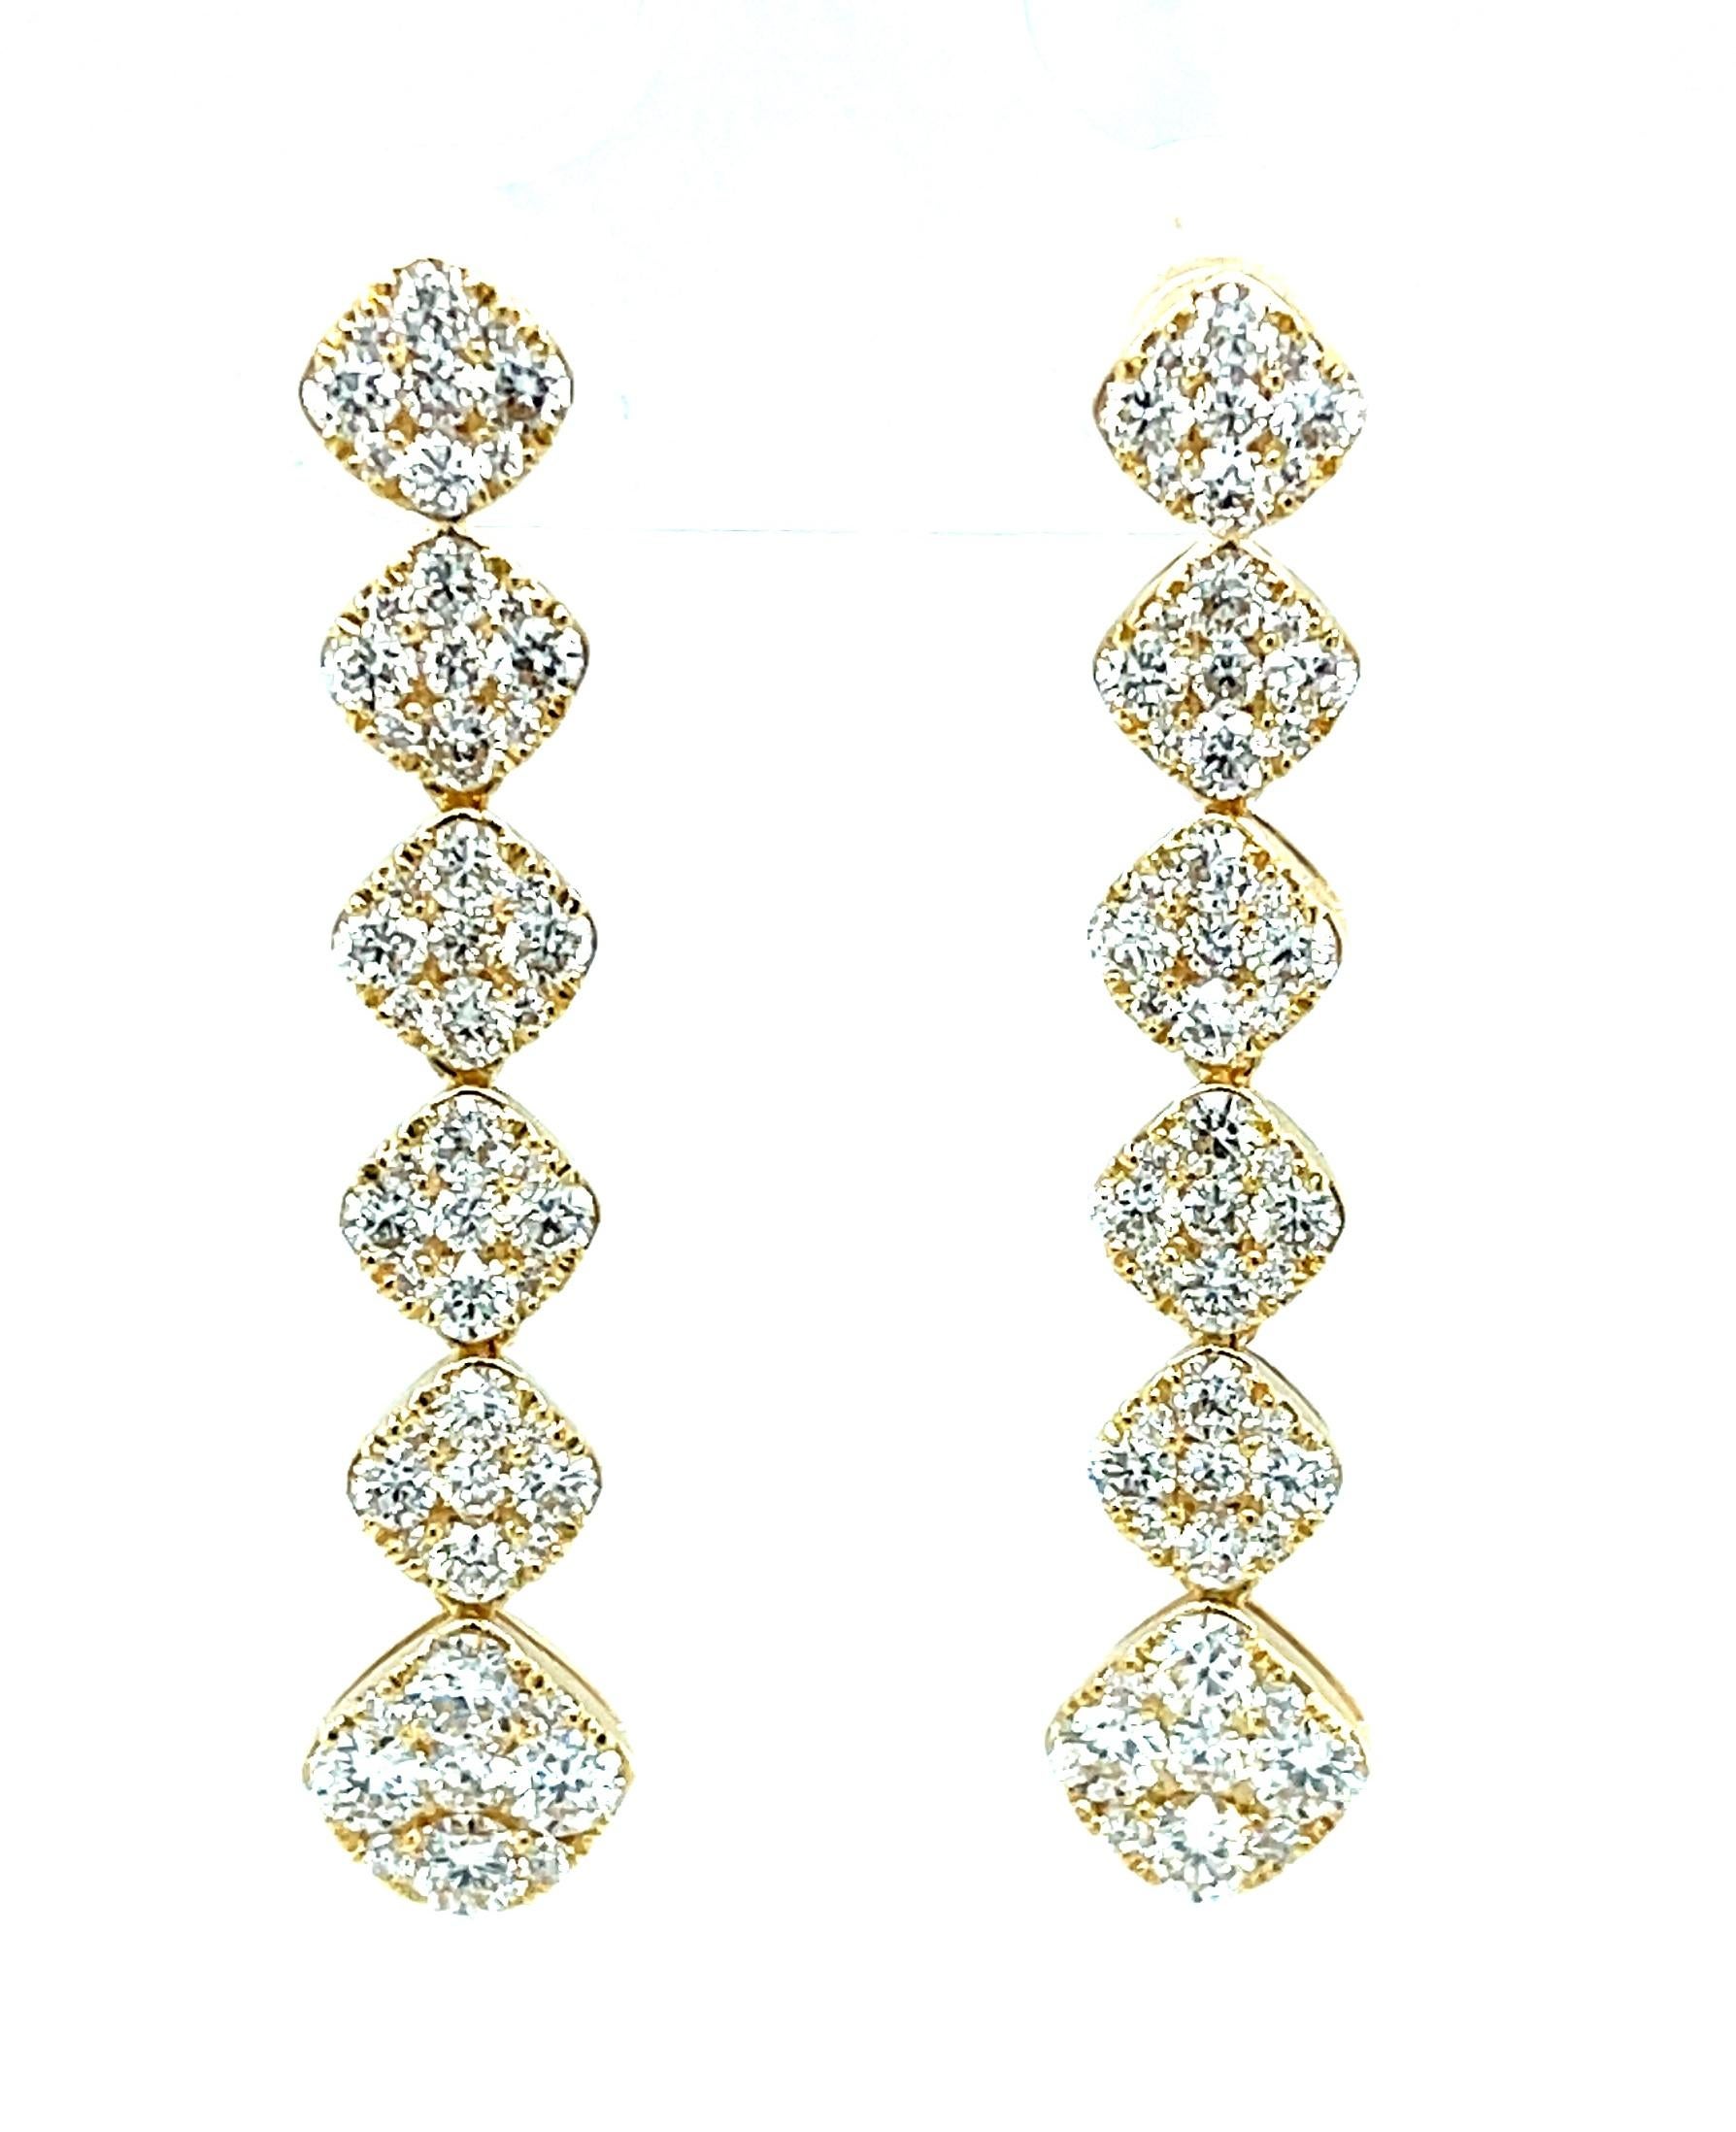 These eye-catching diamond pave and 18k yellow gold dangle earrings are the definition of sparkling elegance! They feature 2.49 carats of fine-quality round brilliant white diamonds pave set in 18k yellow gold diamond-shaped settings. The settings